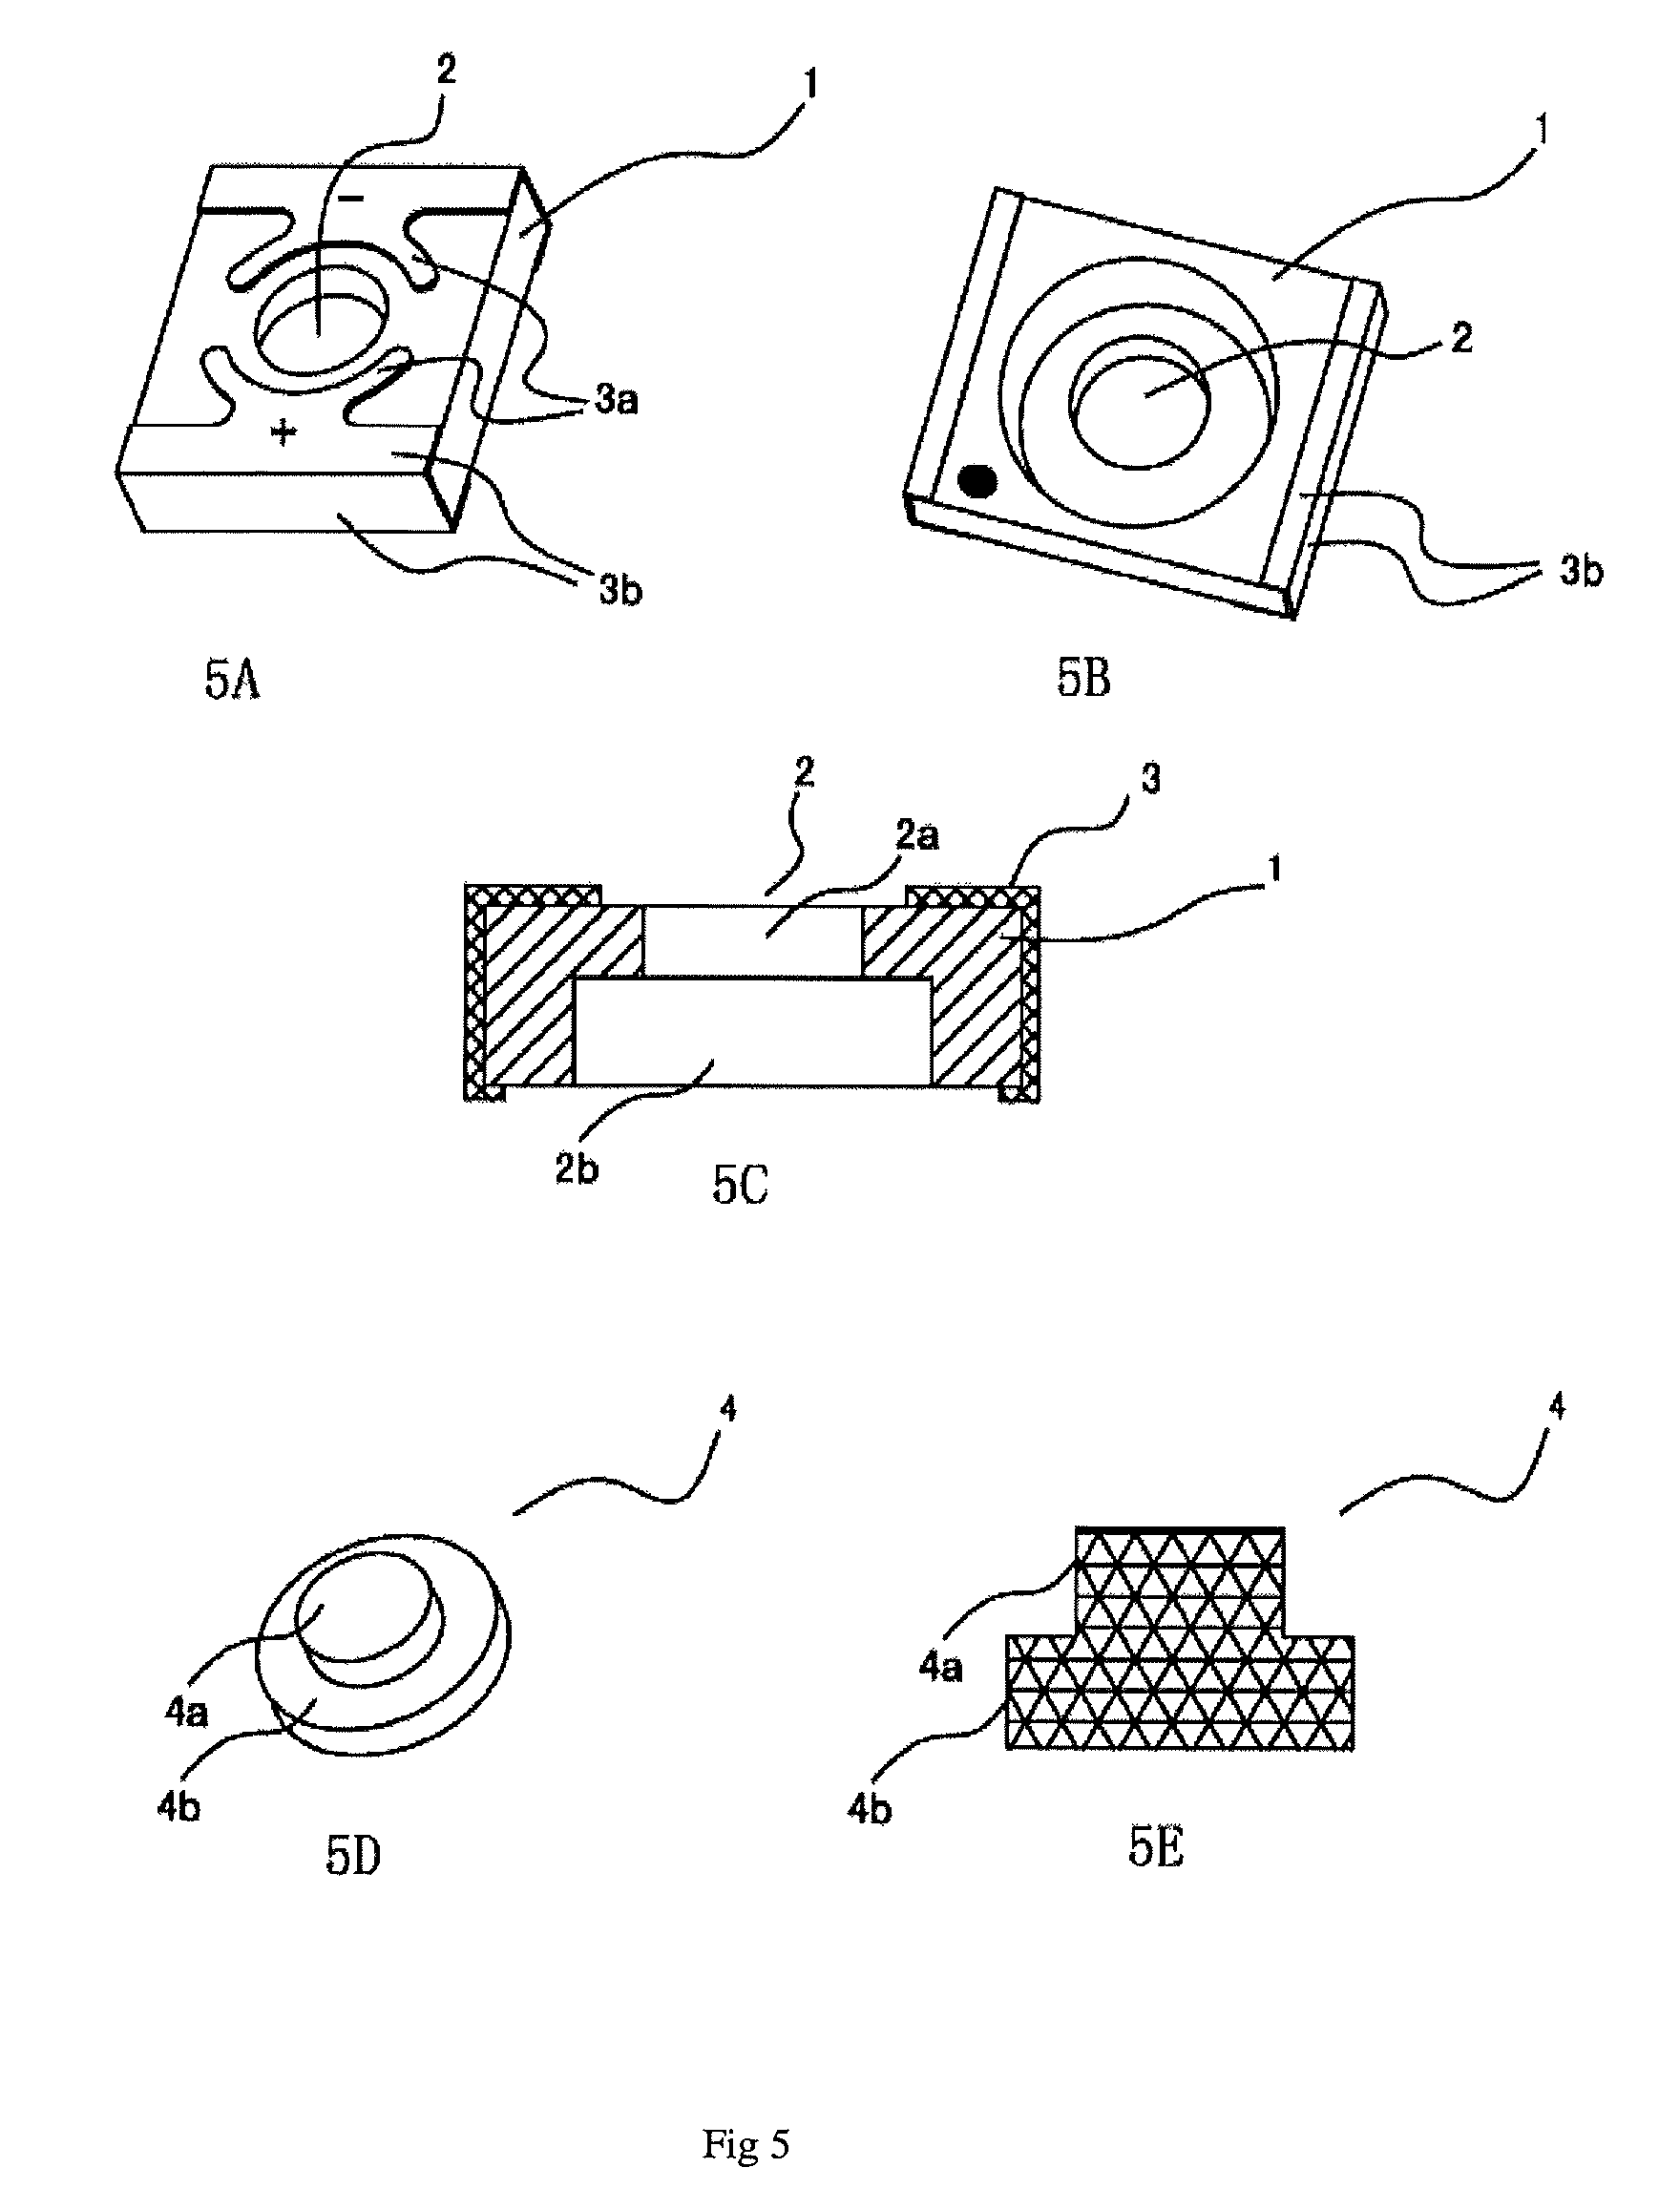 Structure of heat dissipation substrate for power light emitting diode (LED) and a device using same